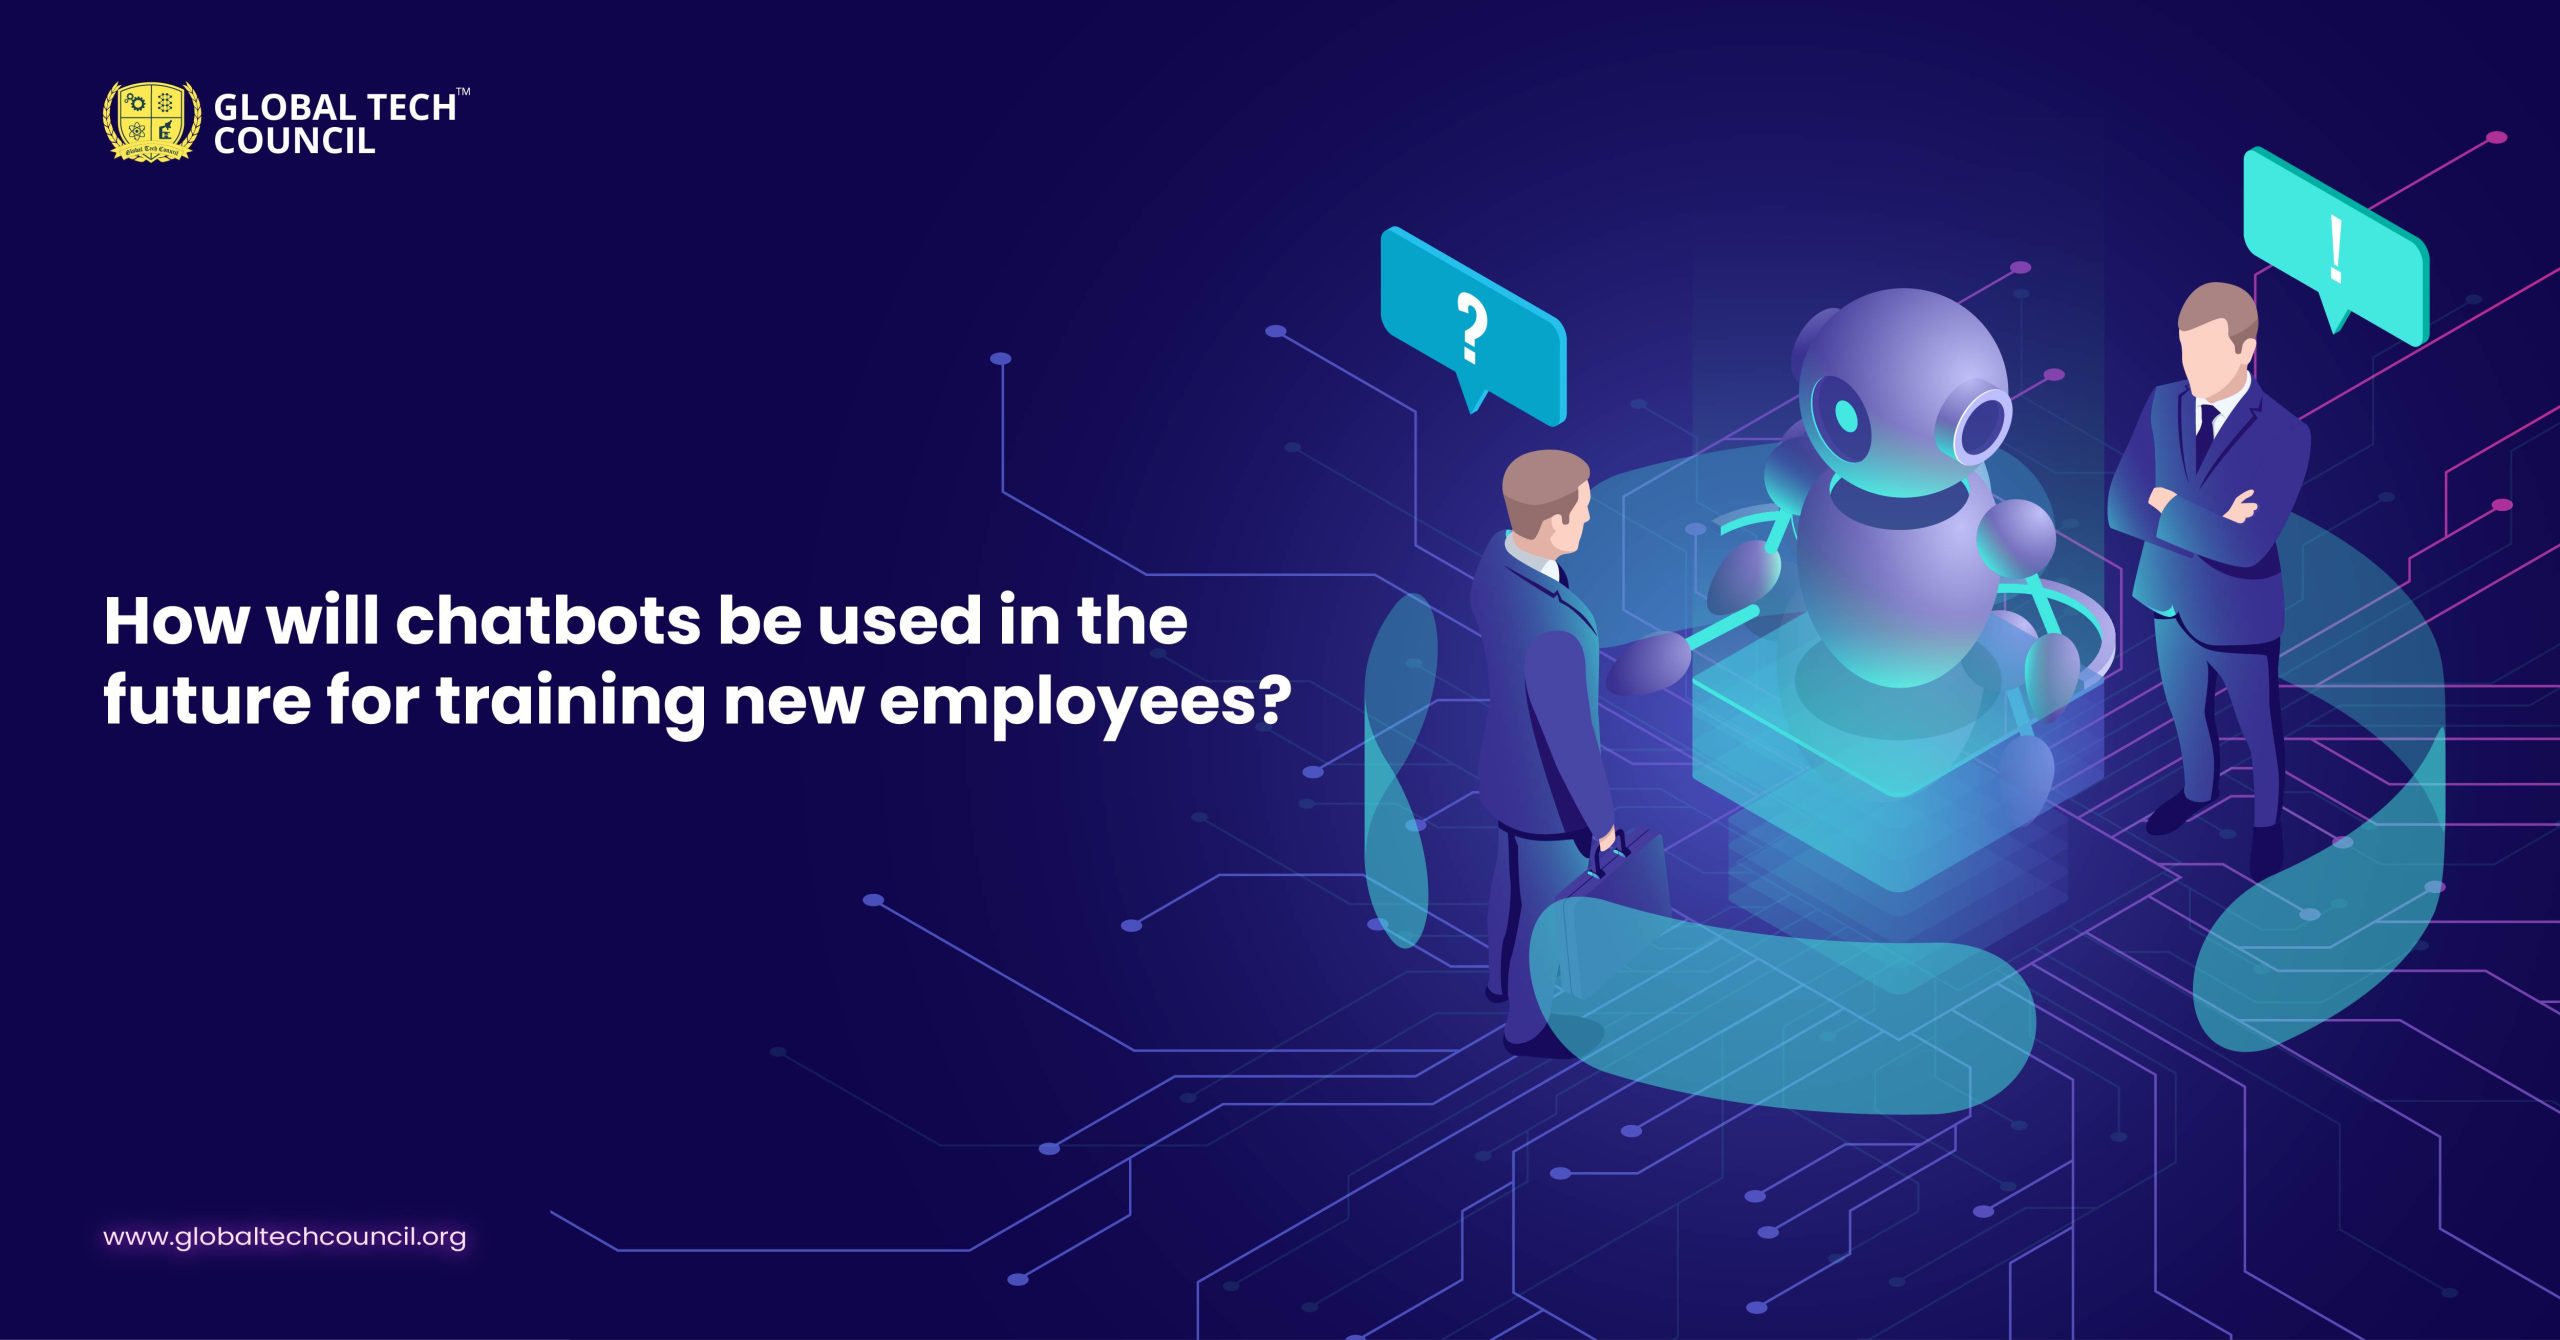 How will chatbots be used in the future for training new employees